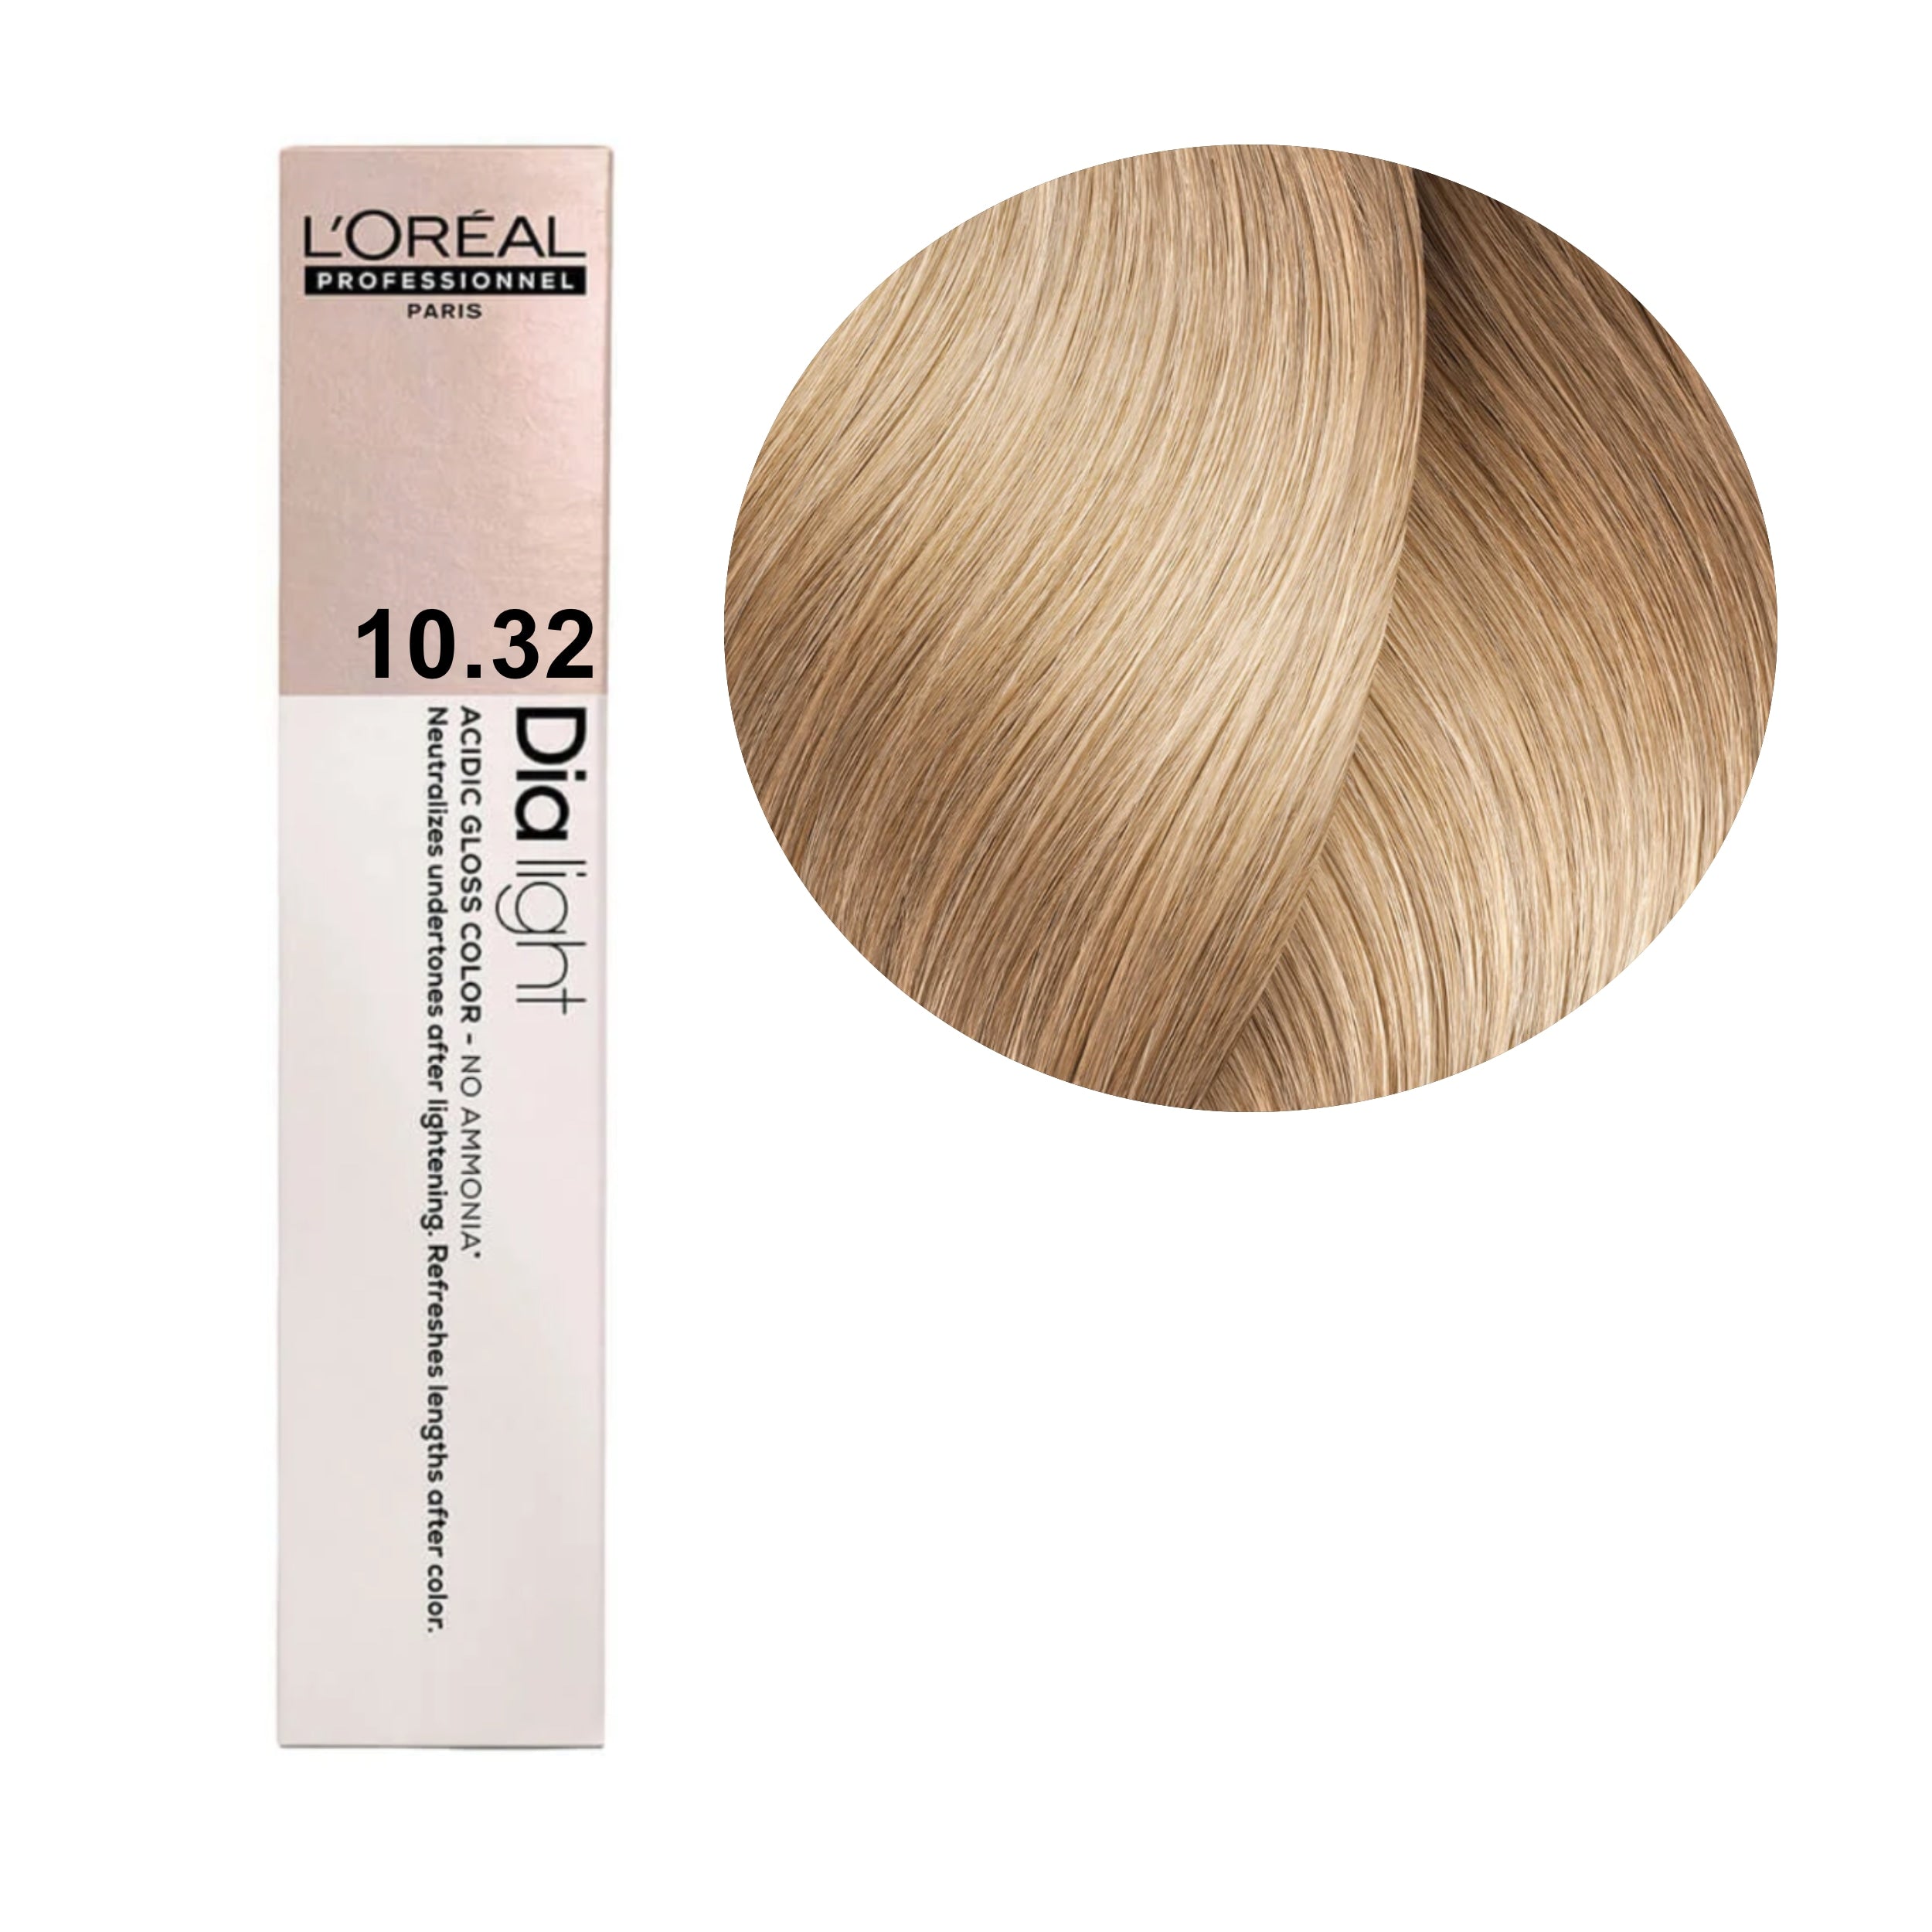 a box of loreal hair coloring cream on a white background